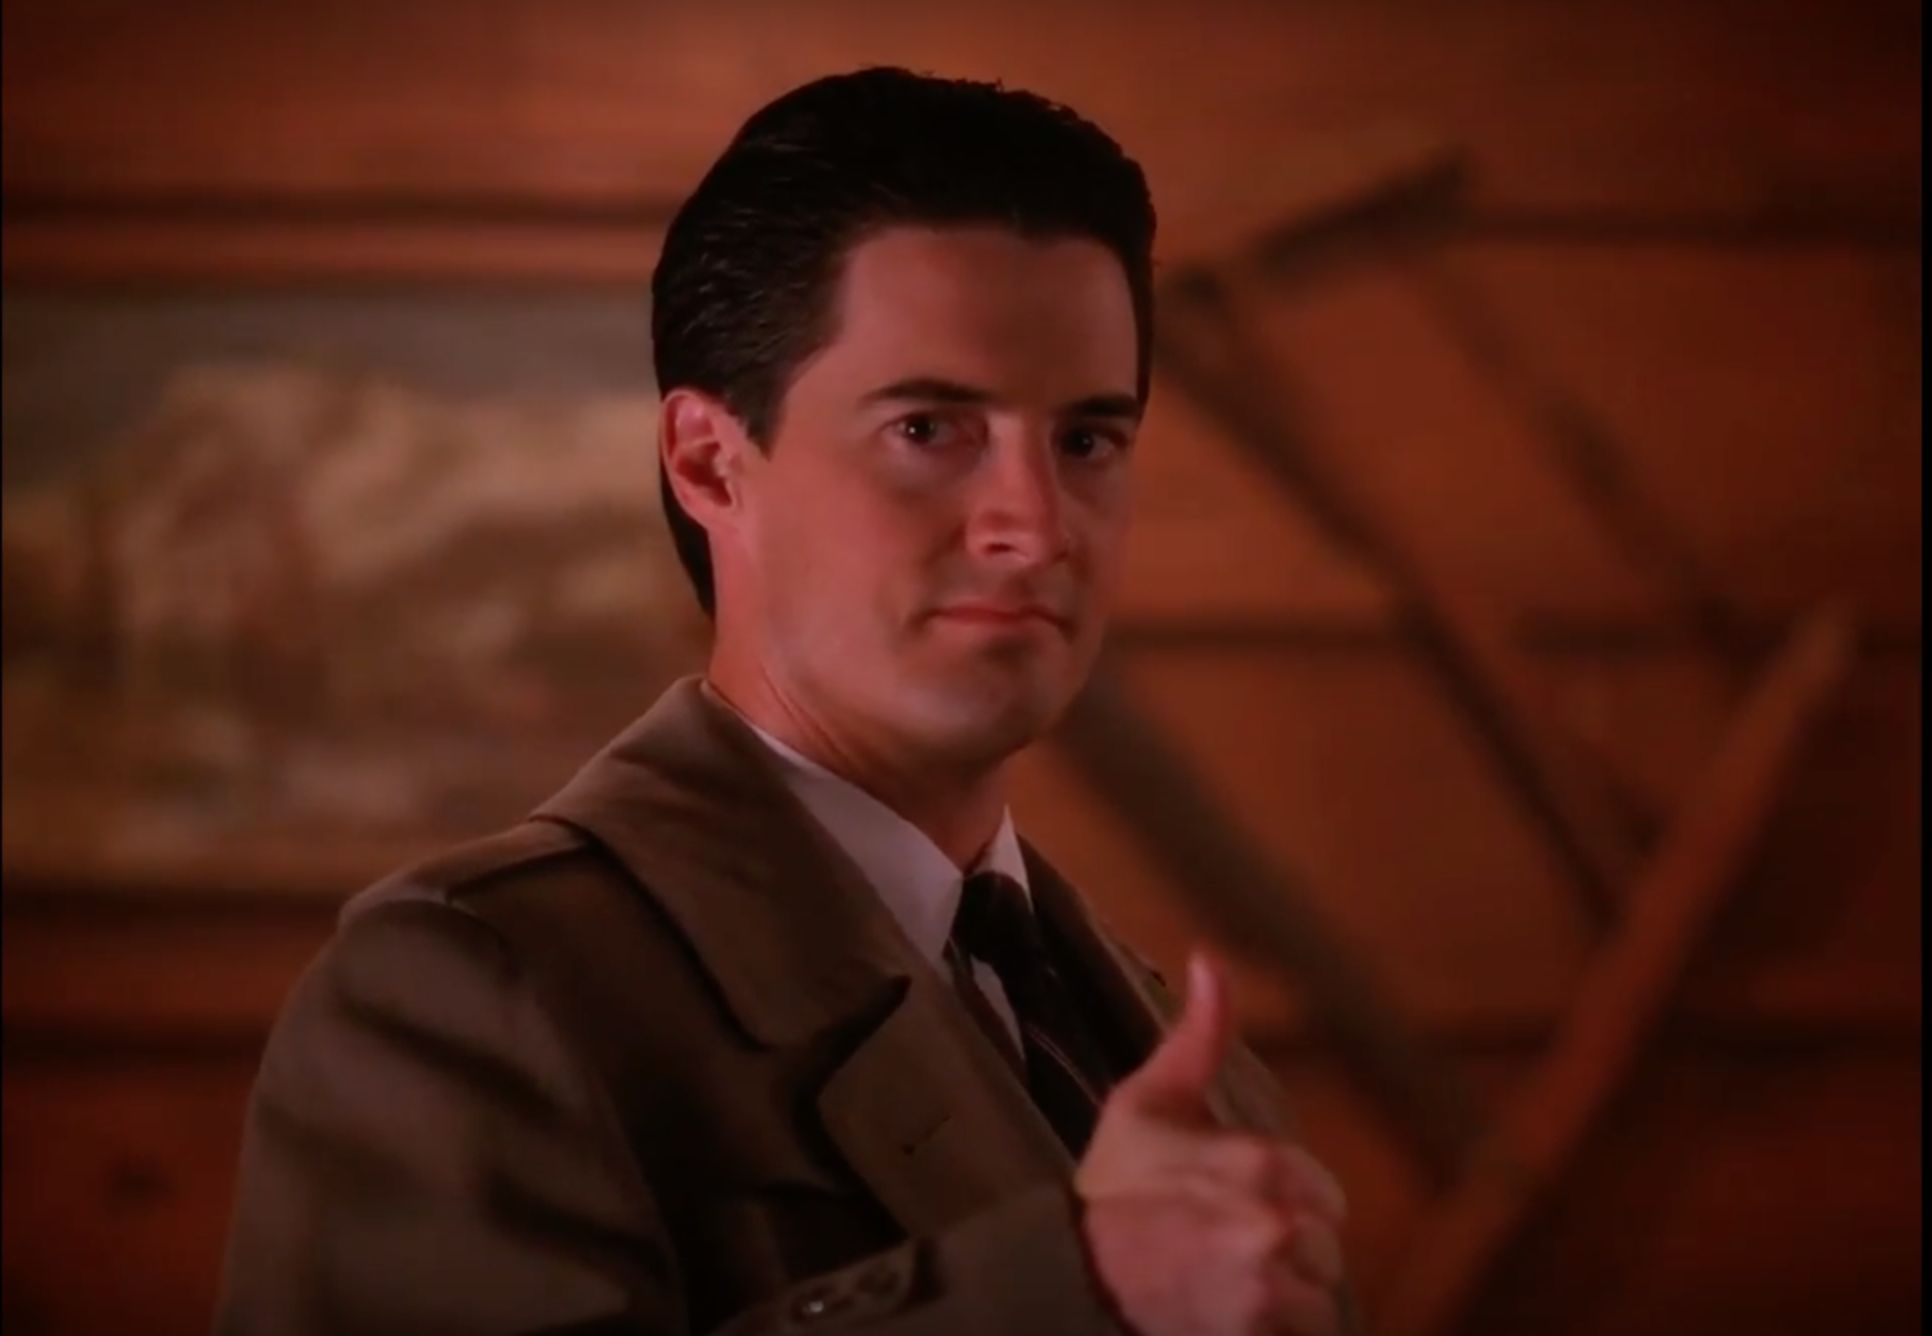 Agent Dale Cooper (Kyle MacLachlan) from Twin Peaks, courtesy of ABC